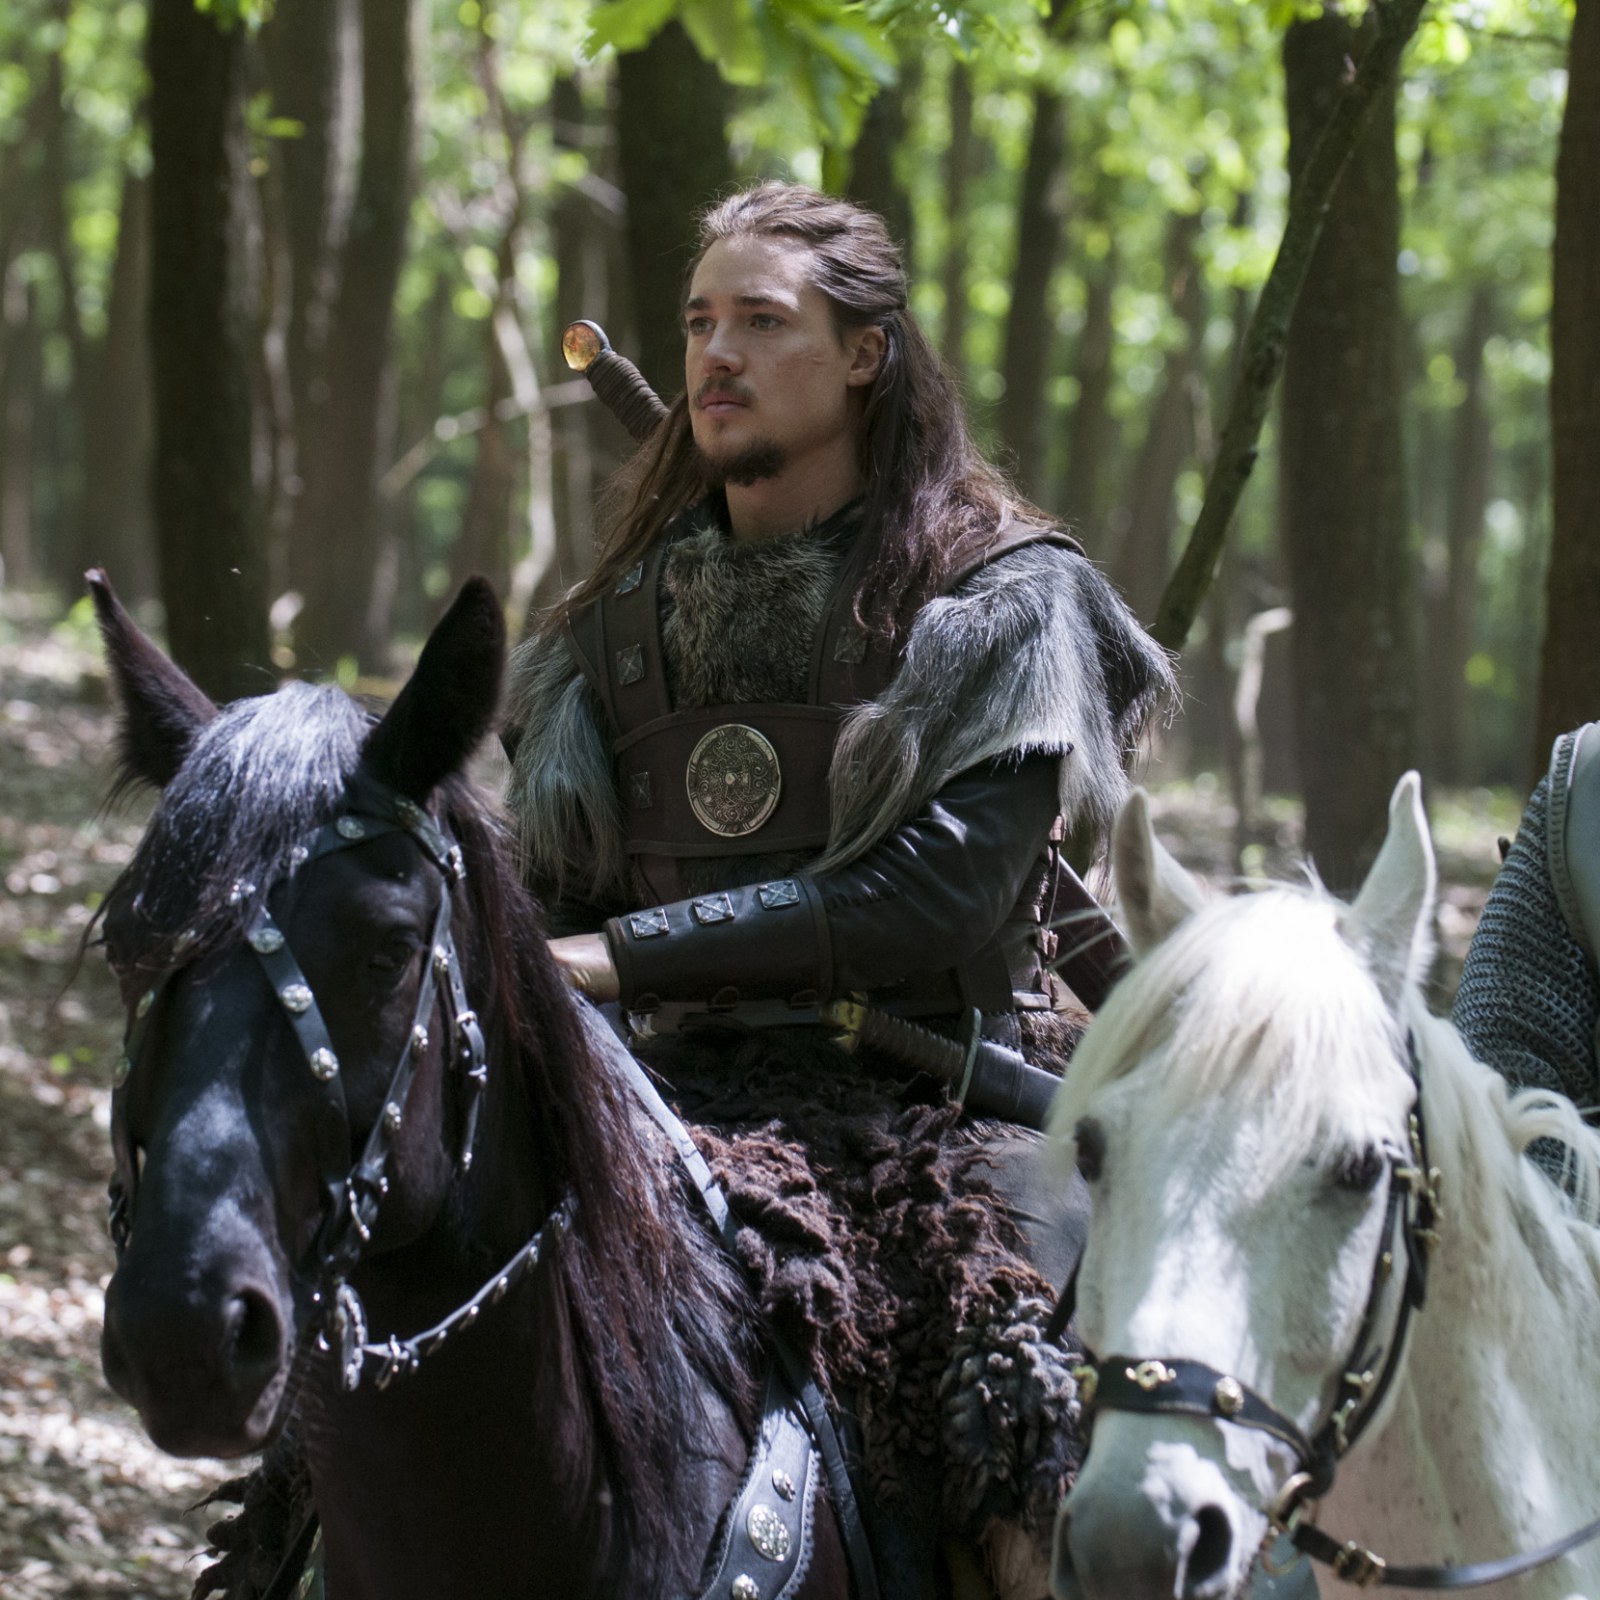 Is 'The Last Kingdom' Based on a True Story?